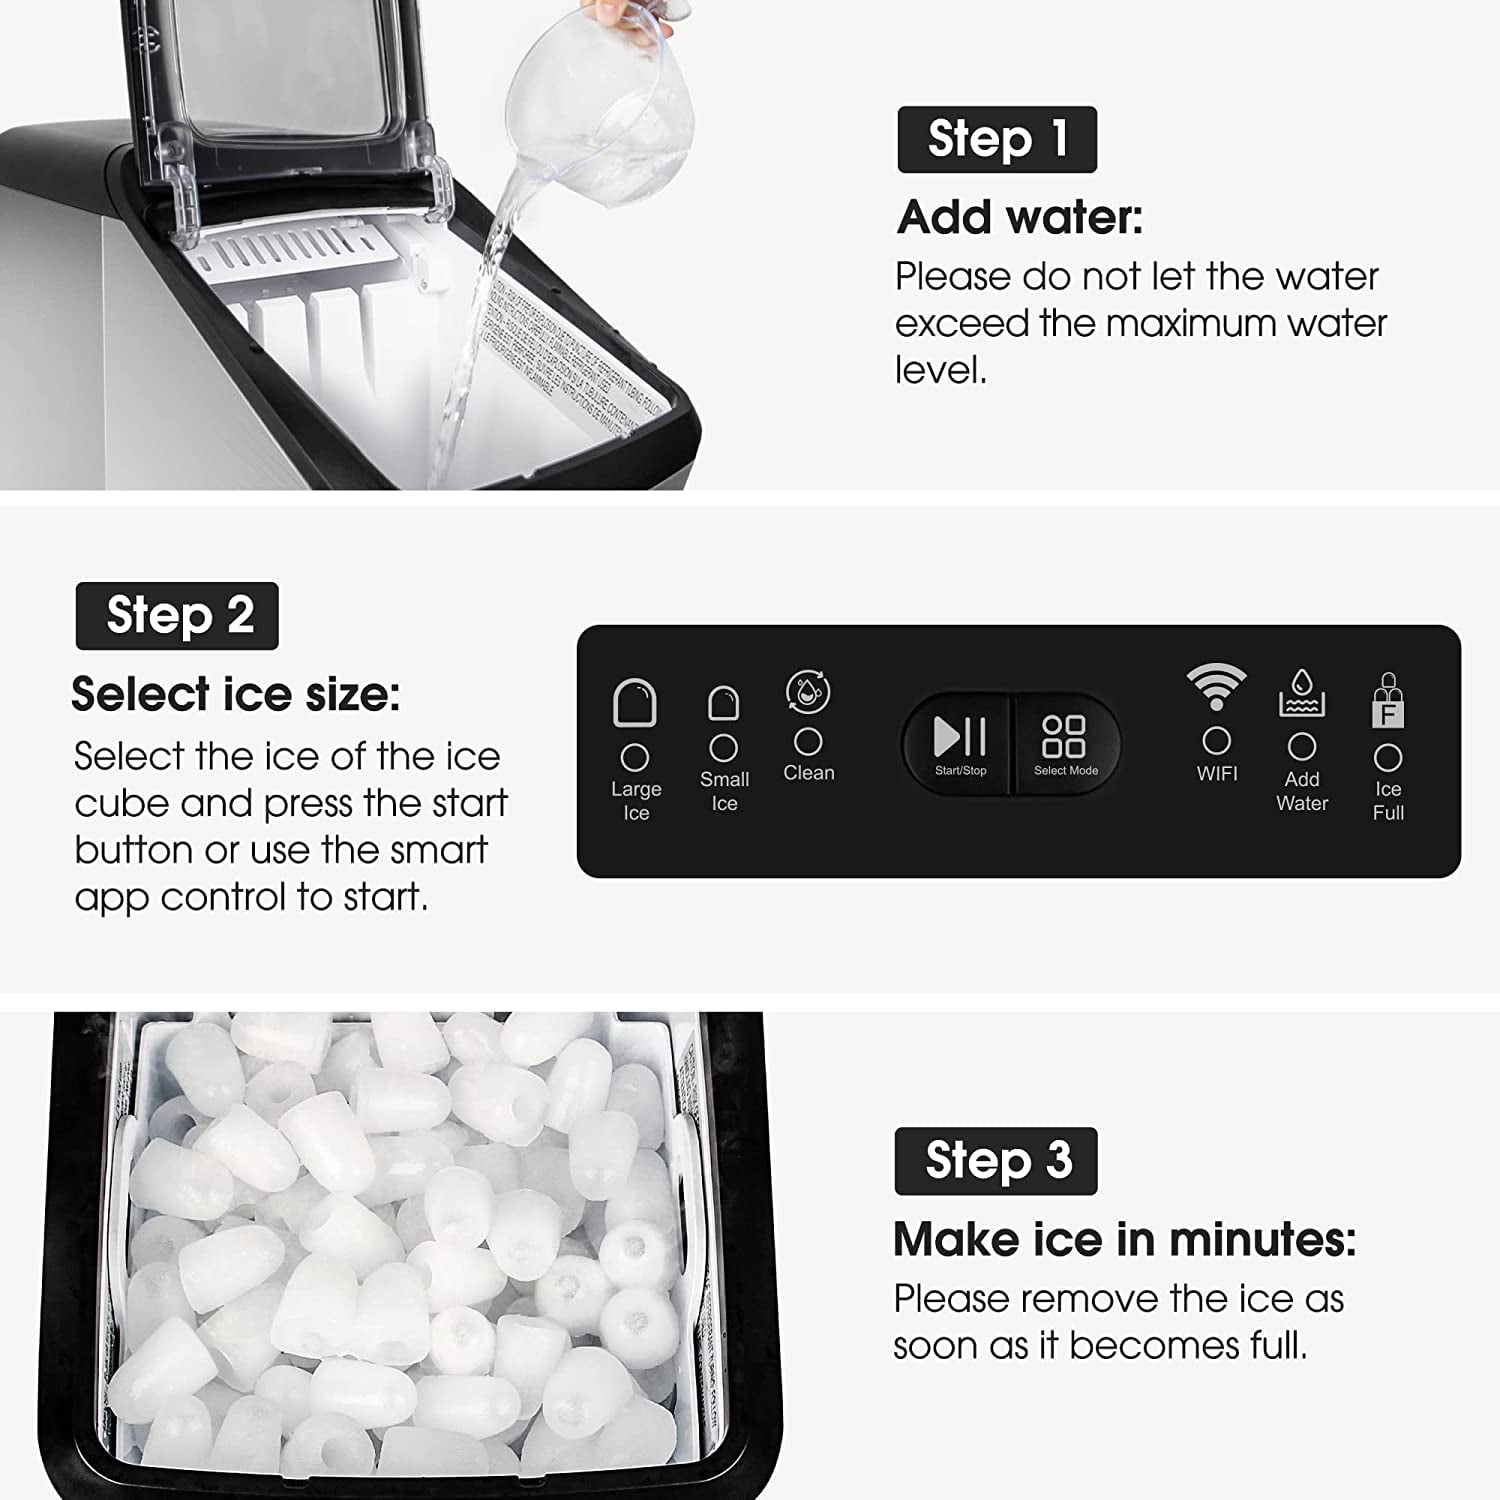 This ice maker is a timesaver! #icemaker #icemakermachine #crownful #c, ice  maker machine